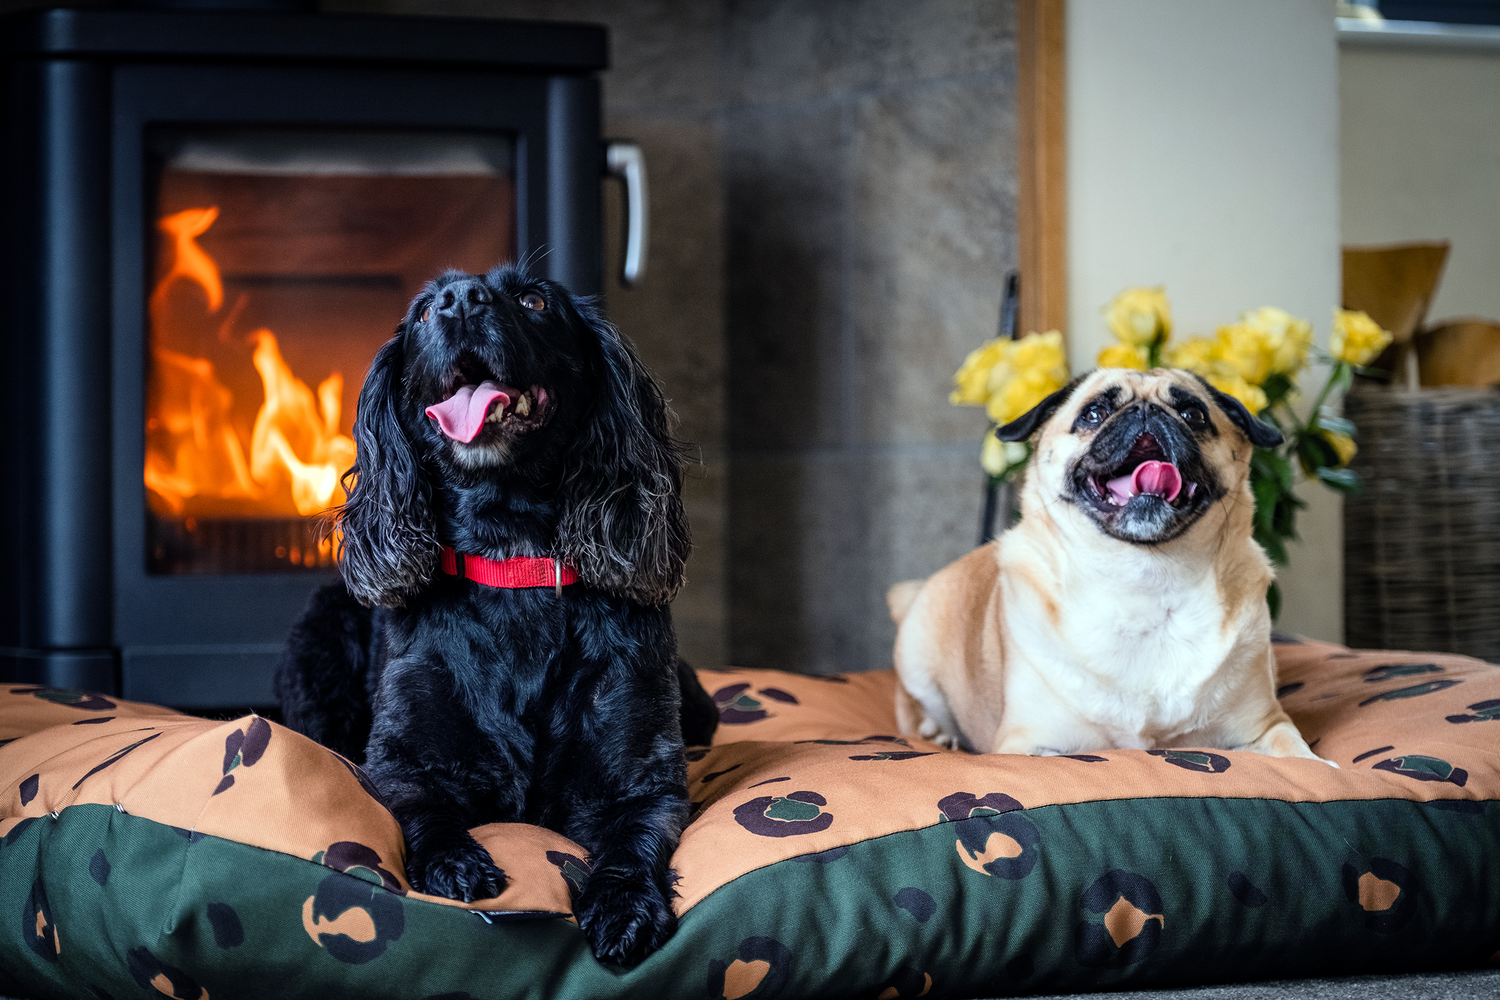 Bella and Millie, our Top Dog Models. Keeping warm by the fire on our modern dog beds.